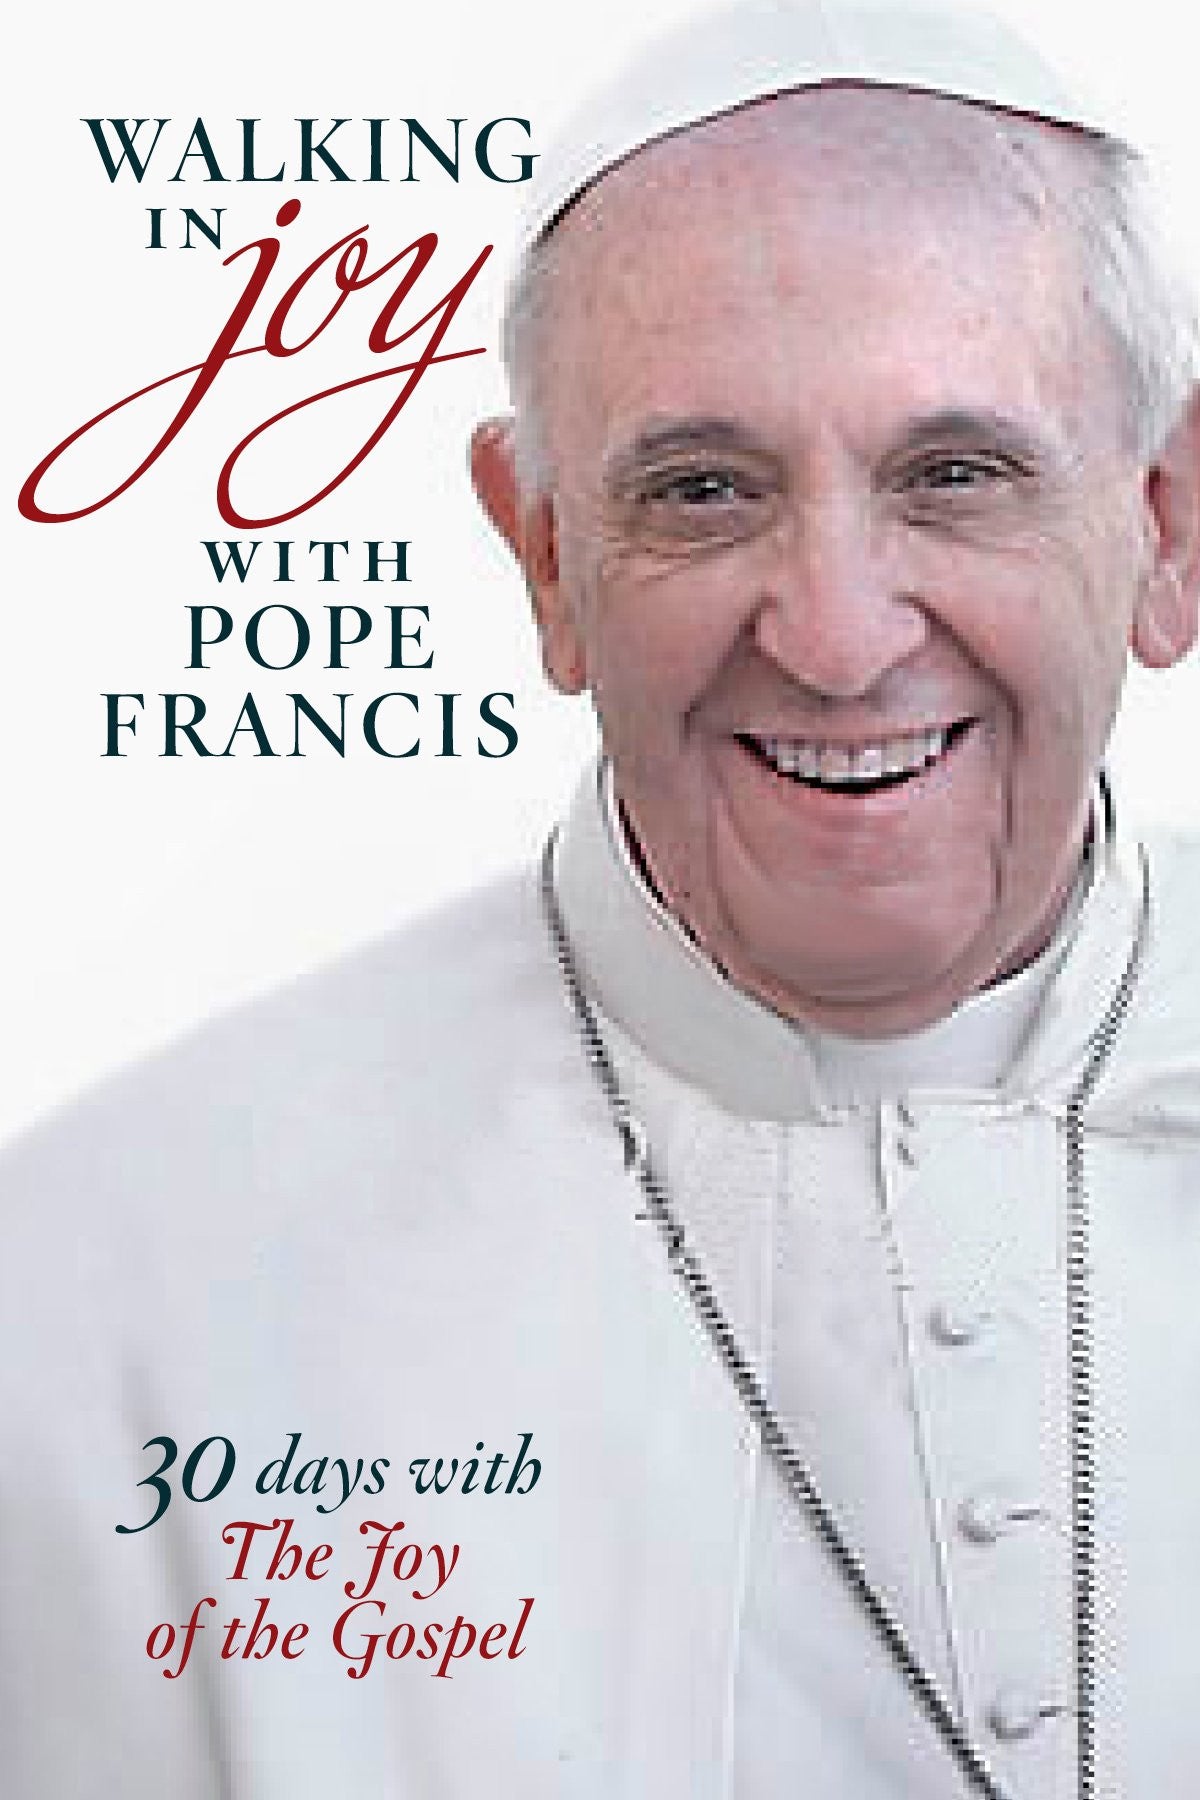 Walking in Joy with Pope Francis